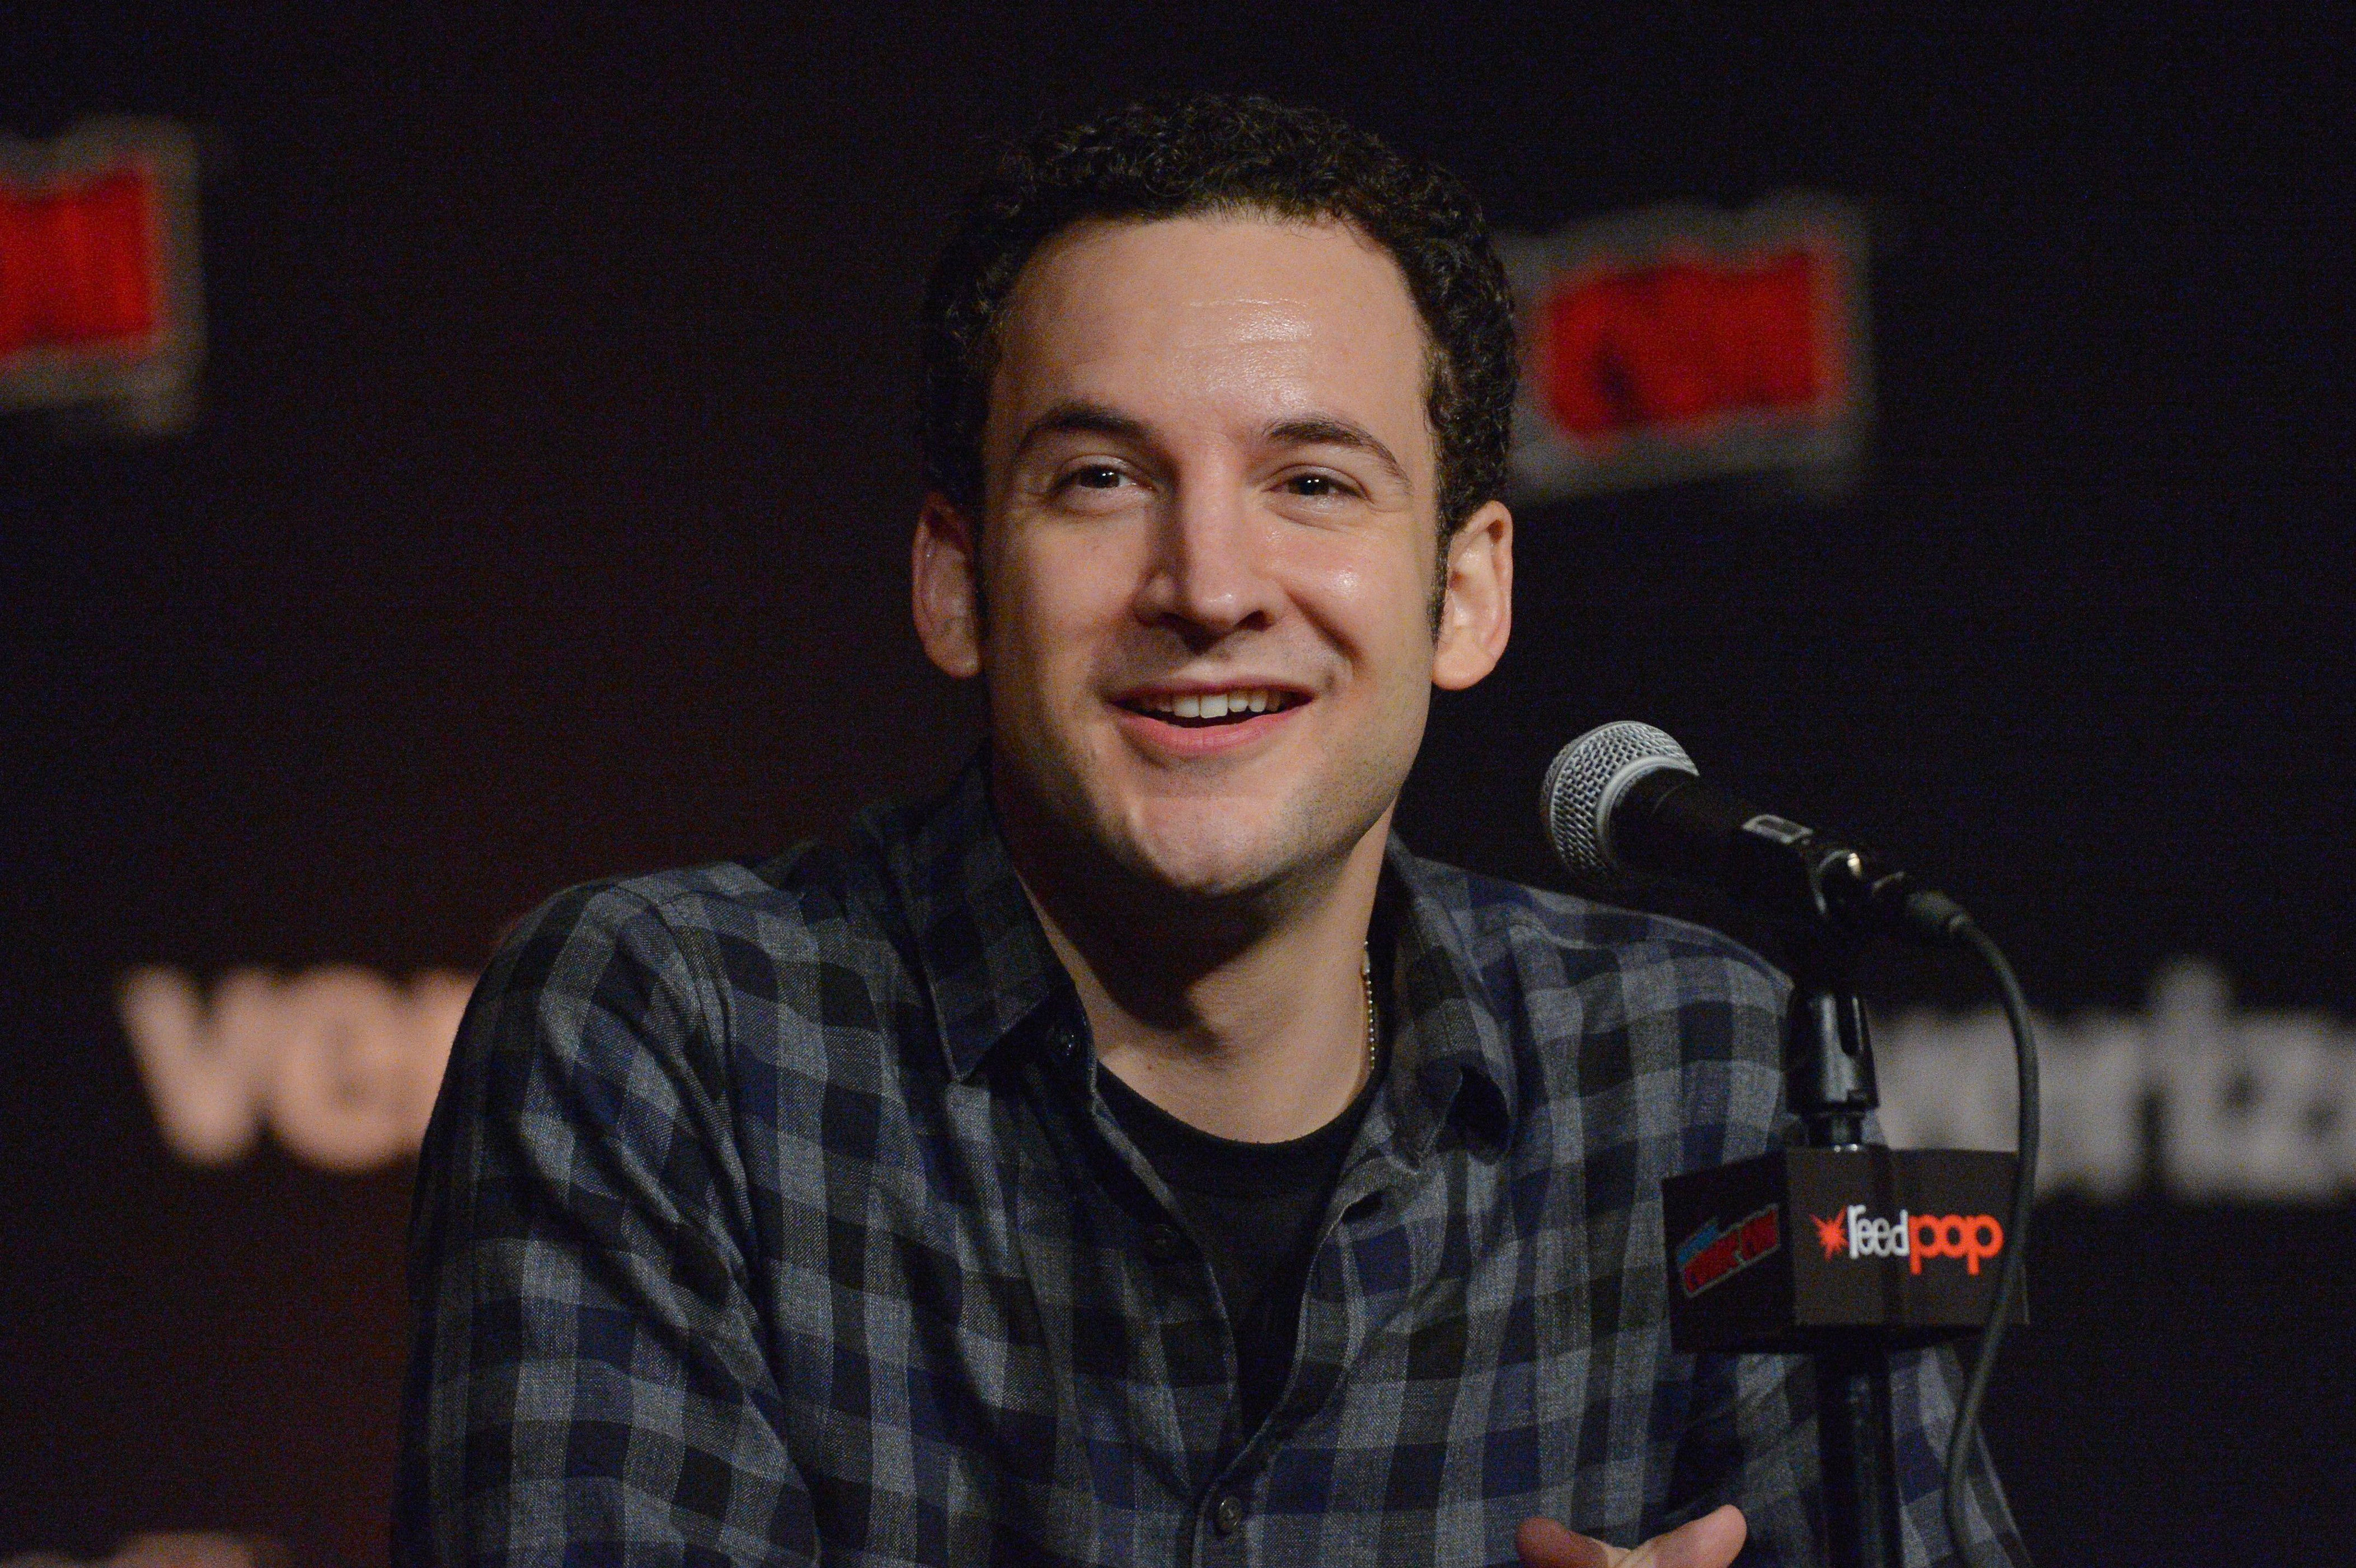 <p>In 2003 during his studies at Stanford University, from which he graduated in 2004, Ben Savage interned for U.S. Senator Arlen Specter. He made his big acting comeback in 2014 reprising his role as Cory Matthews on the "Boy Meets World" spinoff "Girl Meets World," which wrapped in 2017. He appeared on an episode of "Homeland" in 2020 and was seen in the film "Girl in the Shed: The Kidnapping of Abby Hernandez." </p><p>In 2023, he tied the knot with long-term girlfriend Tessa Angermeier. Ben has also pursued a career in politics: He unsuccessfully ran for West Hollywood City Council in 2022 and has since filed paperwork to<a href="https://www.wonderwall.com/celebrity/profiles/celebs-who-ran-for-political-office-35498.gallery"> run for Congress in 2024</a>. </p>